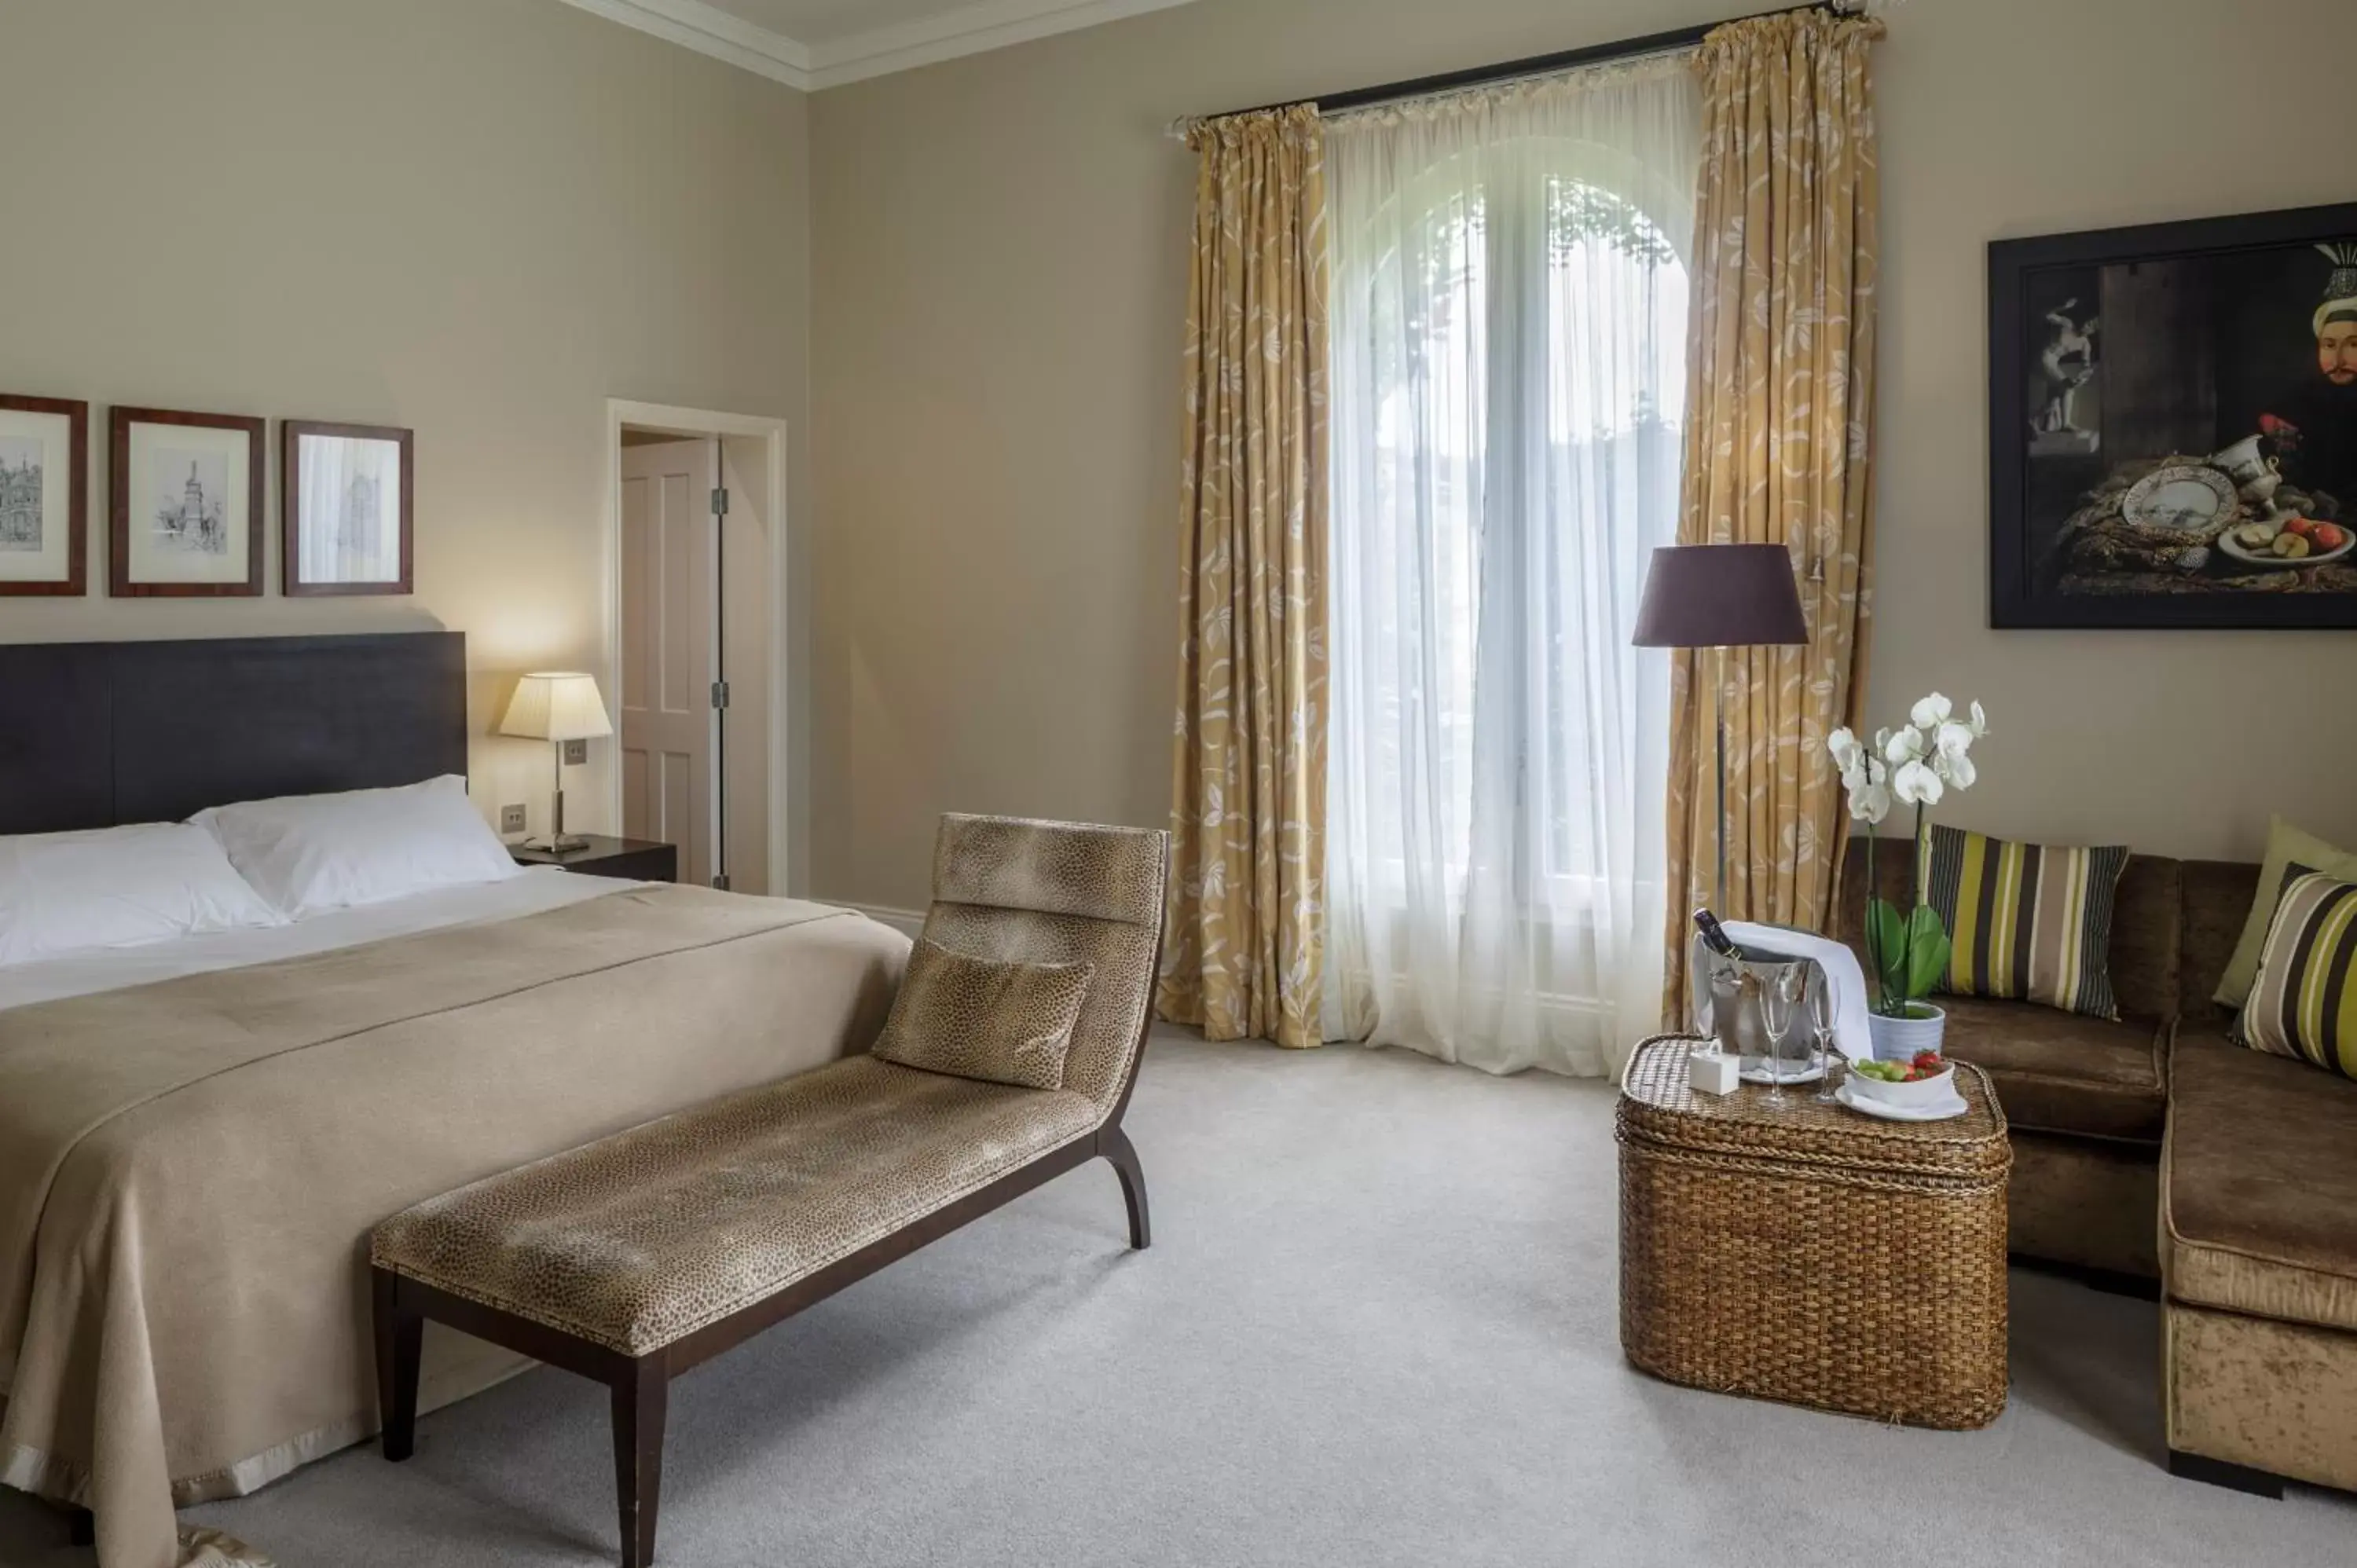 Bedroom in Bowood Hotel, Spa, and Golf Resort